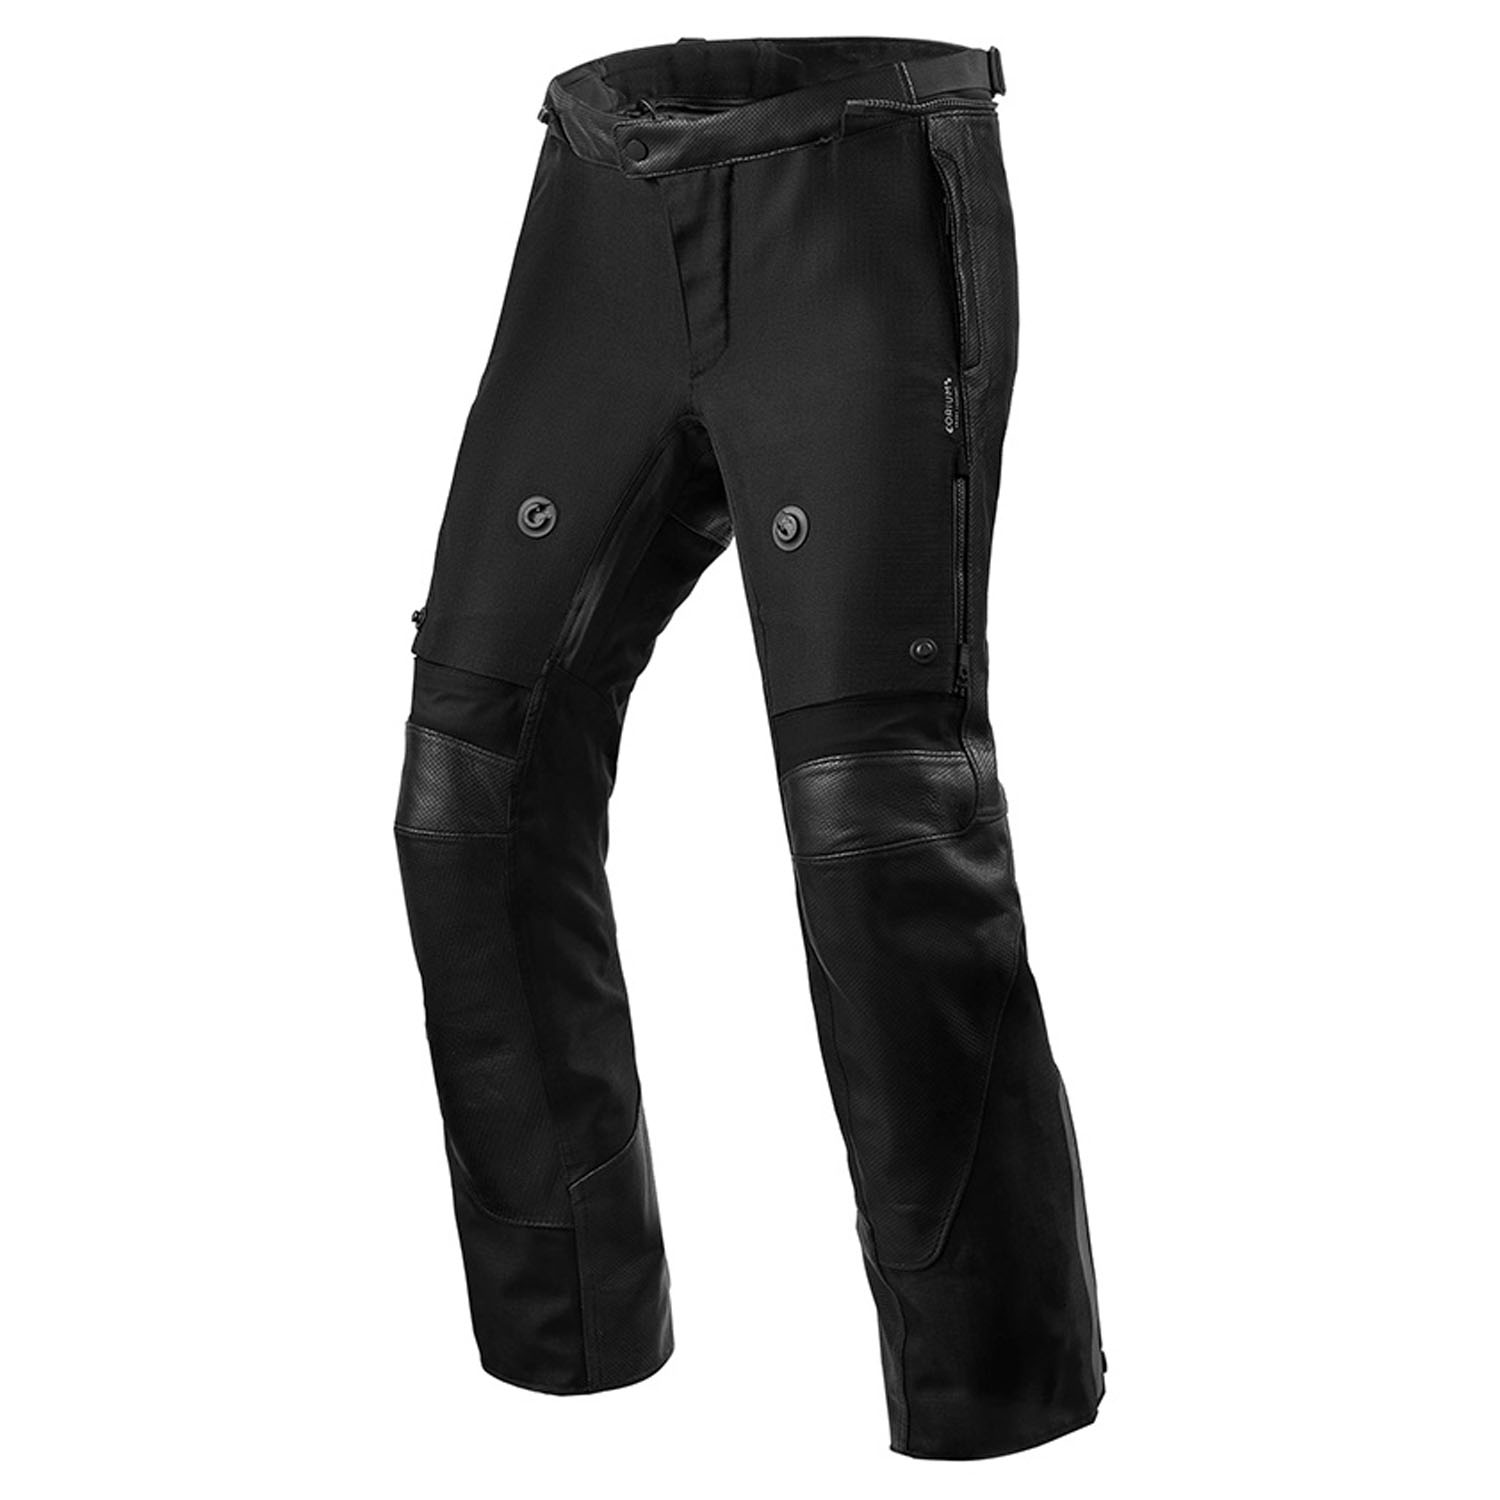 Image of REV'IT! Trousers Valve H2O Black Standard Motorcycle Pants Size 52 ID 8700001315814